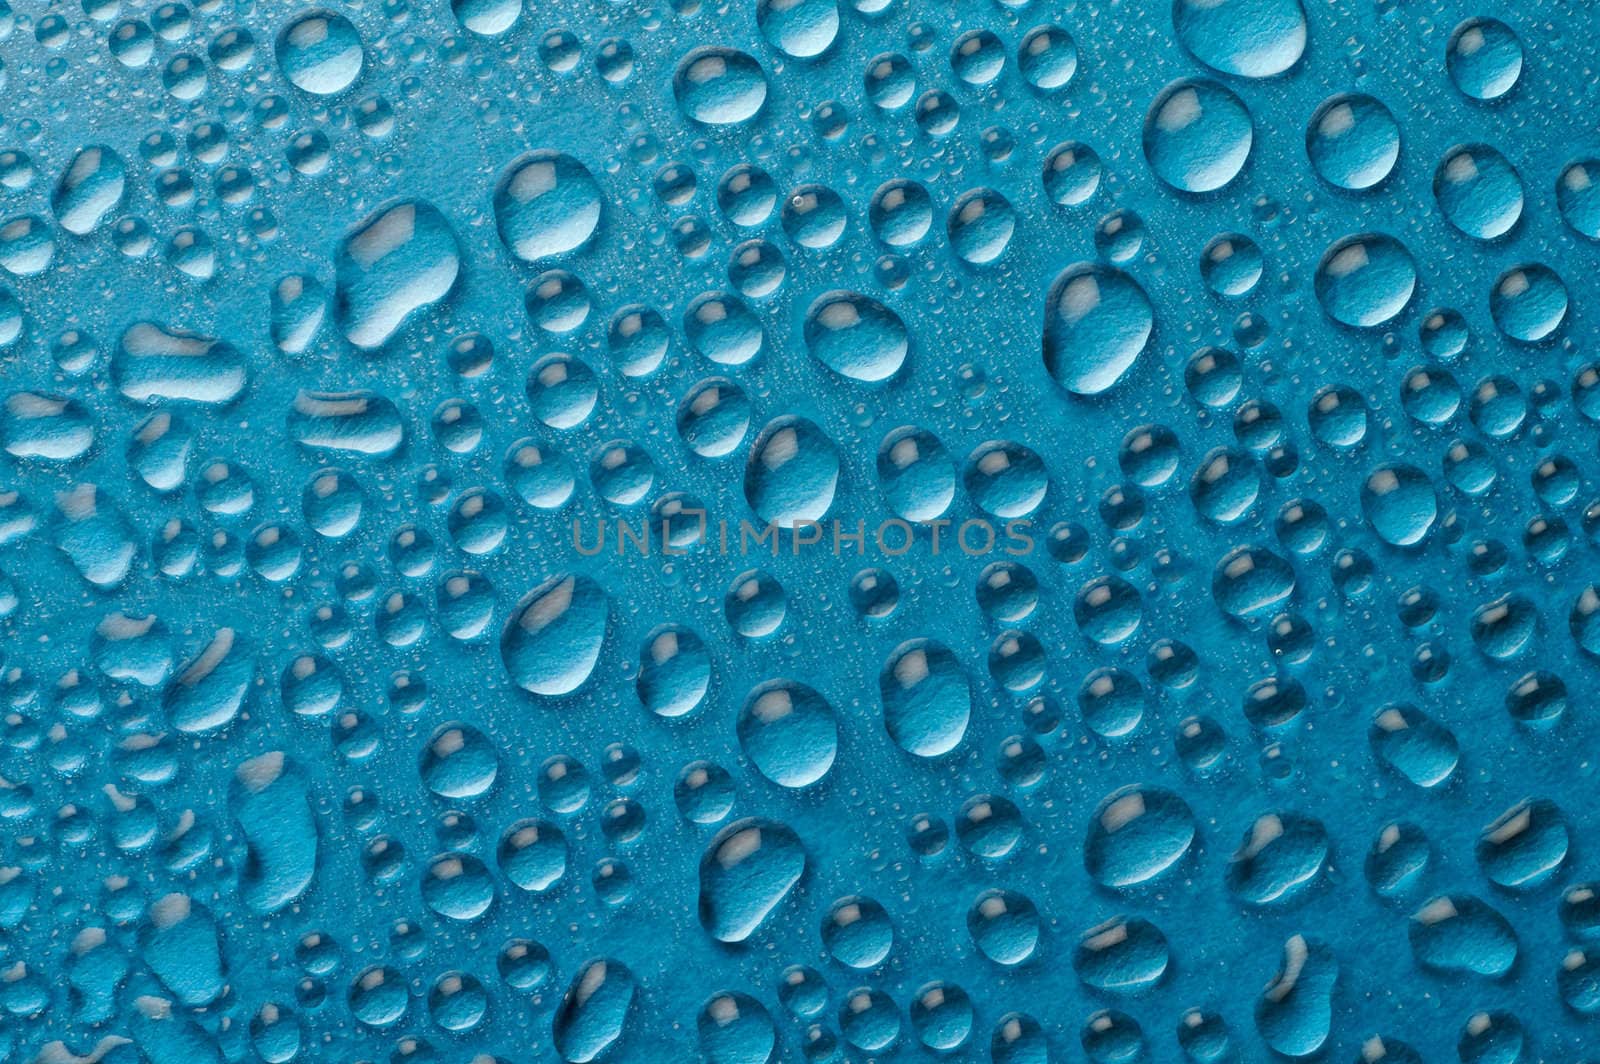 Droplets on blue background by Laborer